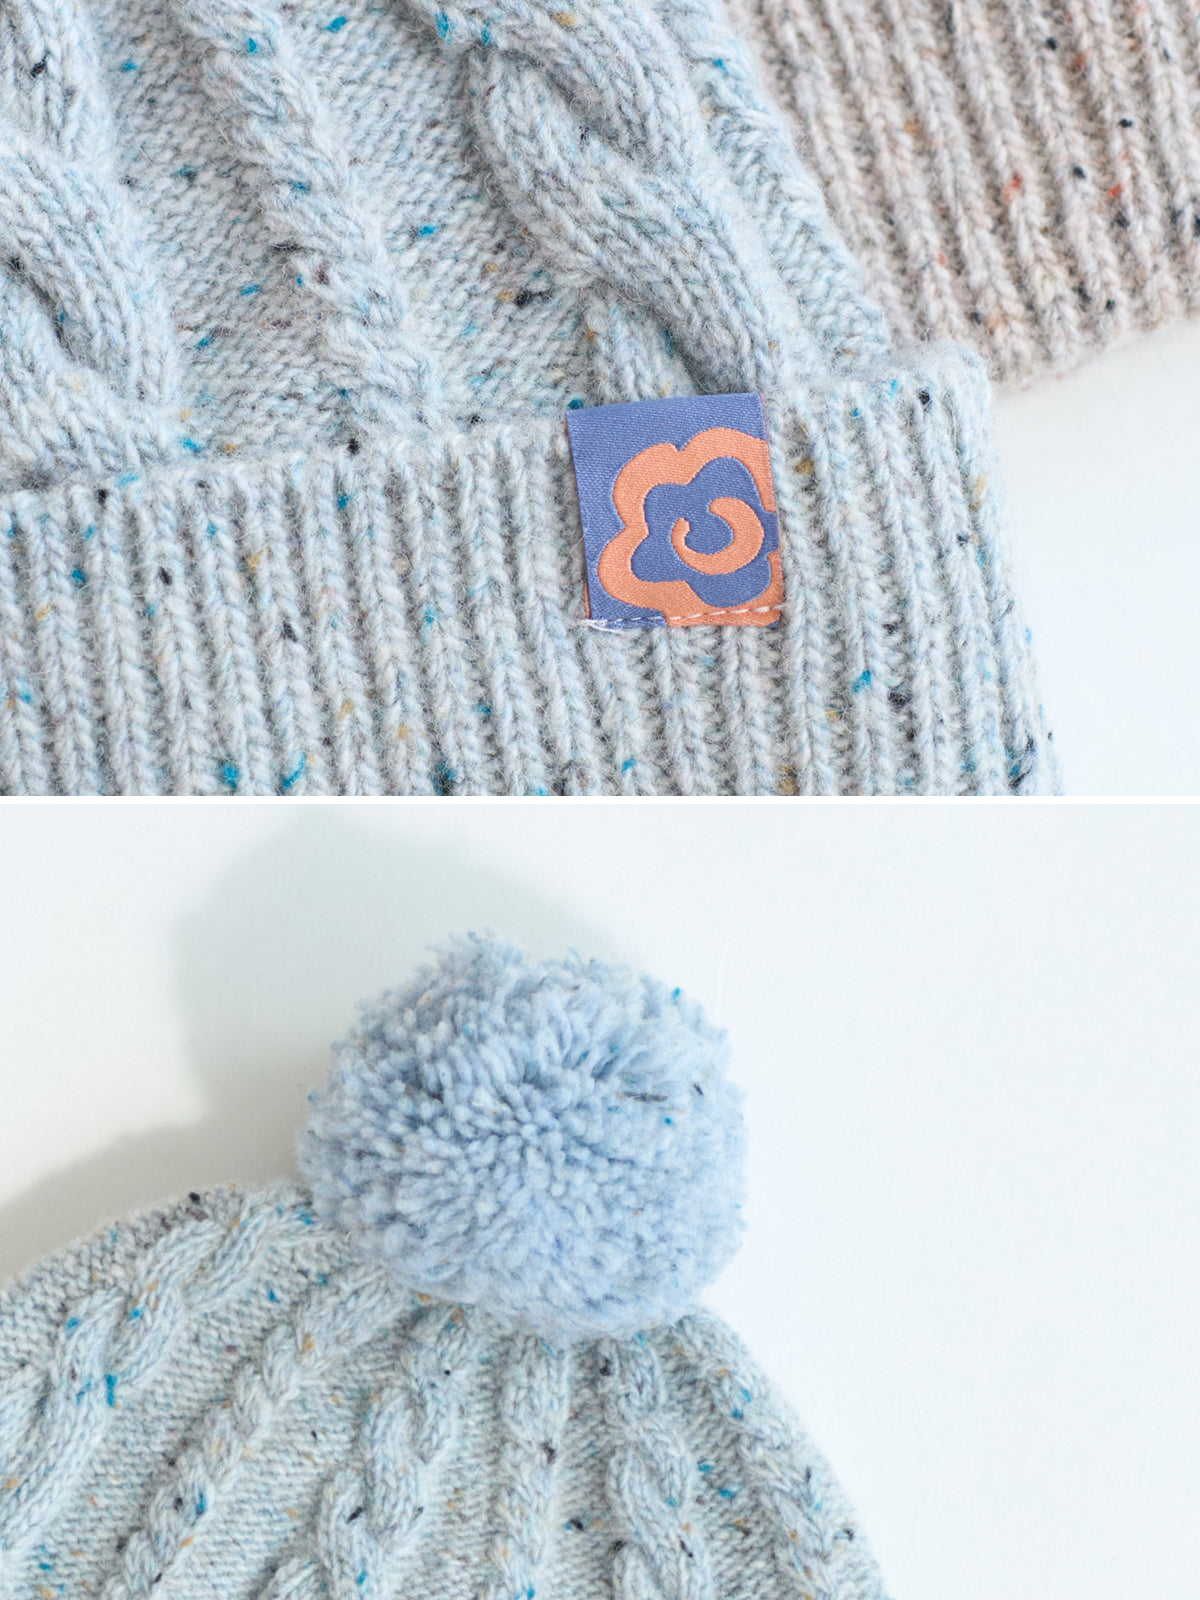 "Pom Pom" Cable Knit Wool Beanie Hat - Icy Blue